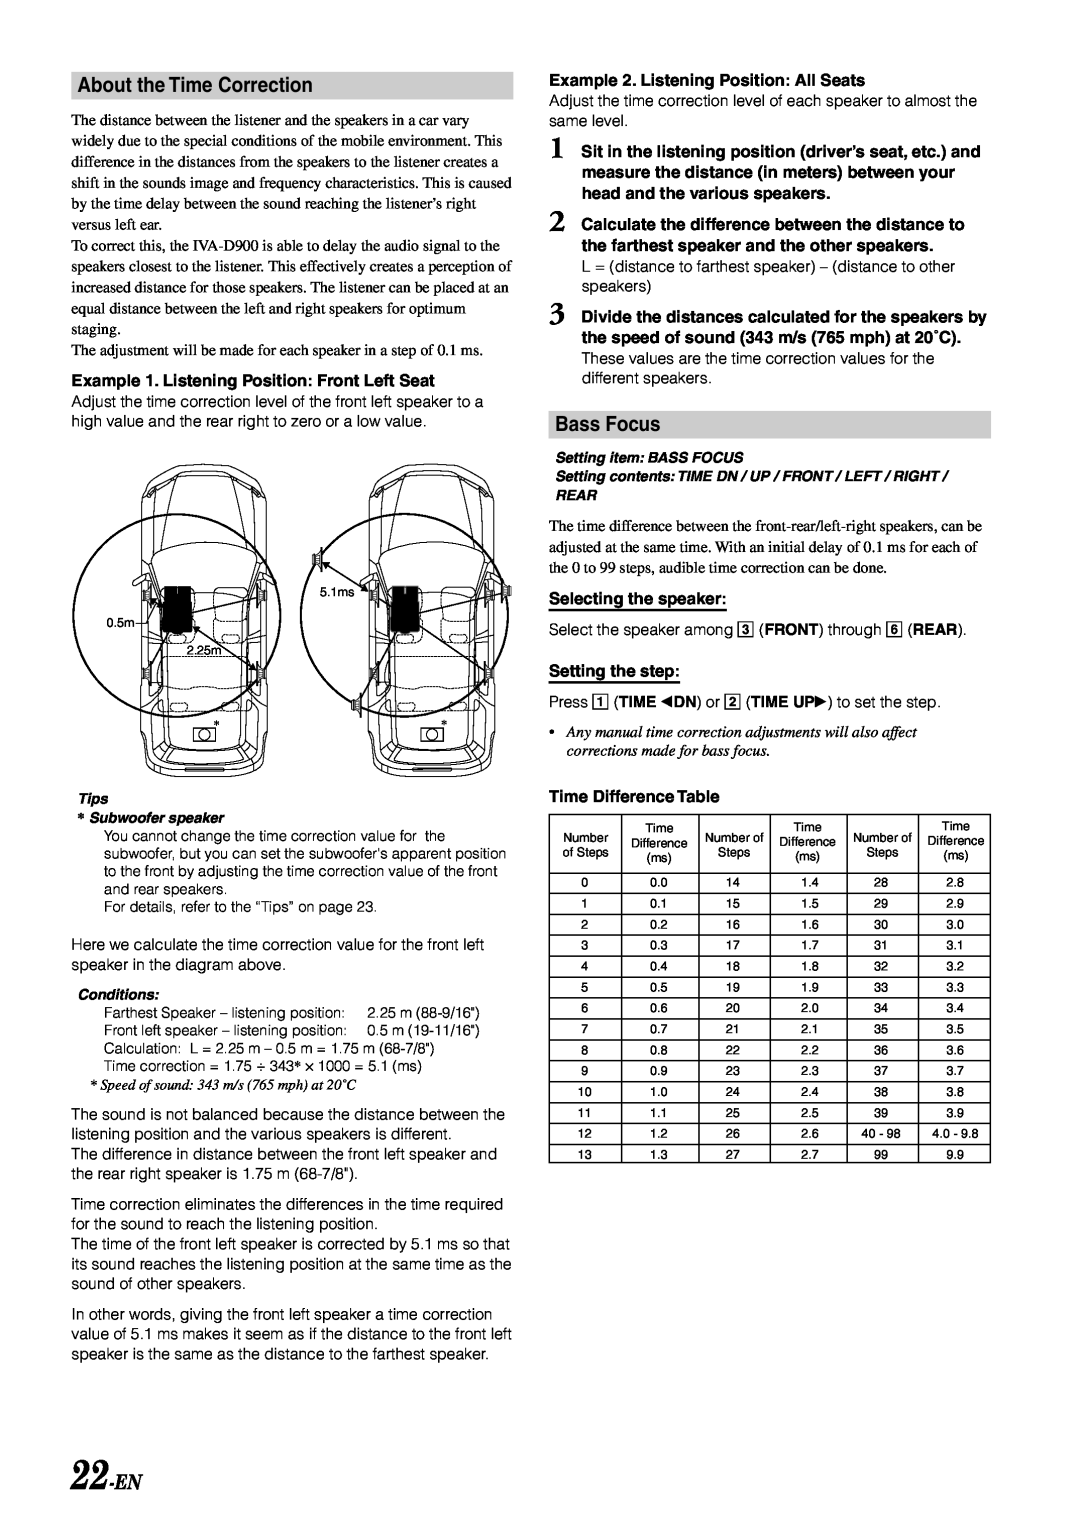 Alpine IVA-D900 owner manual About the Time Correction, Bass Focus, 22-EN 